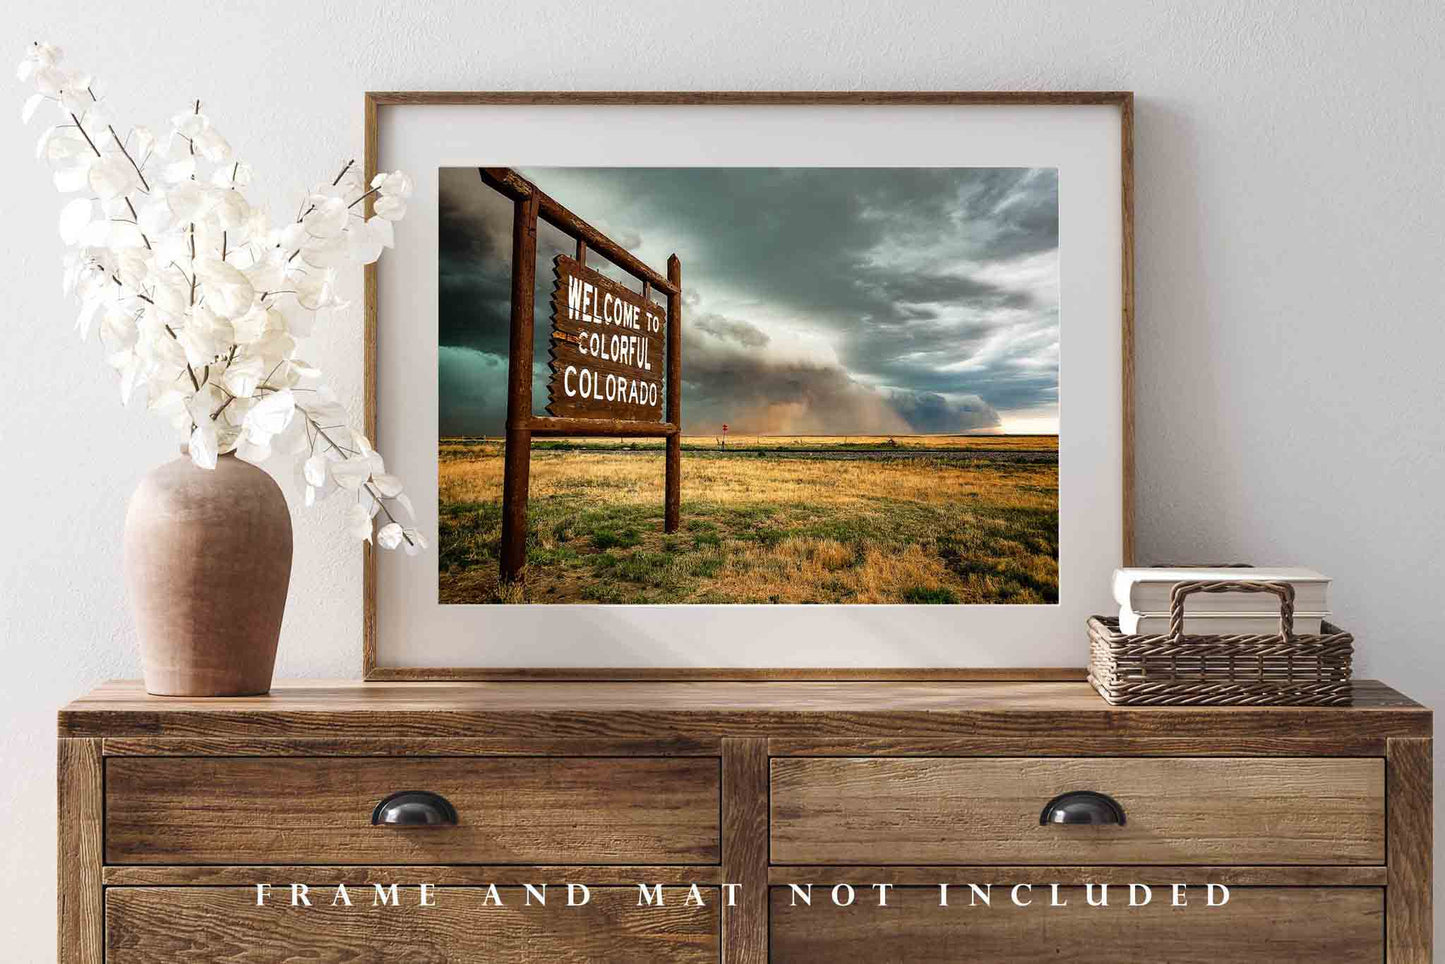 Storm Photography Print (Not Framed) Picture of Thunderstorm Advancing Past a Colorful Colorado State Line Sign Great Plains Wall Art Western Decor